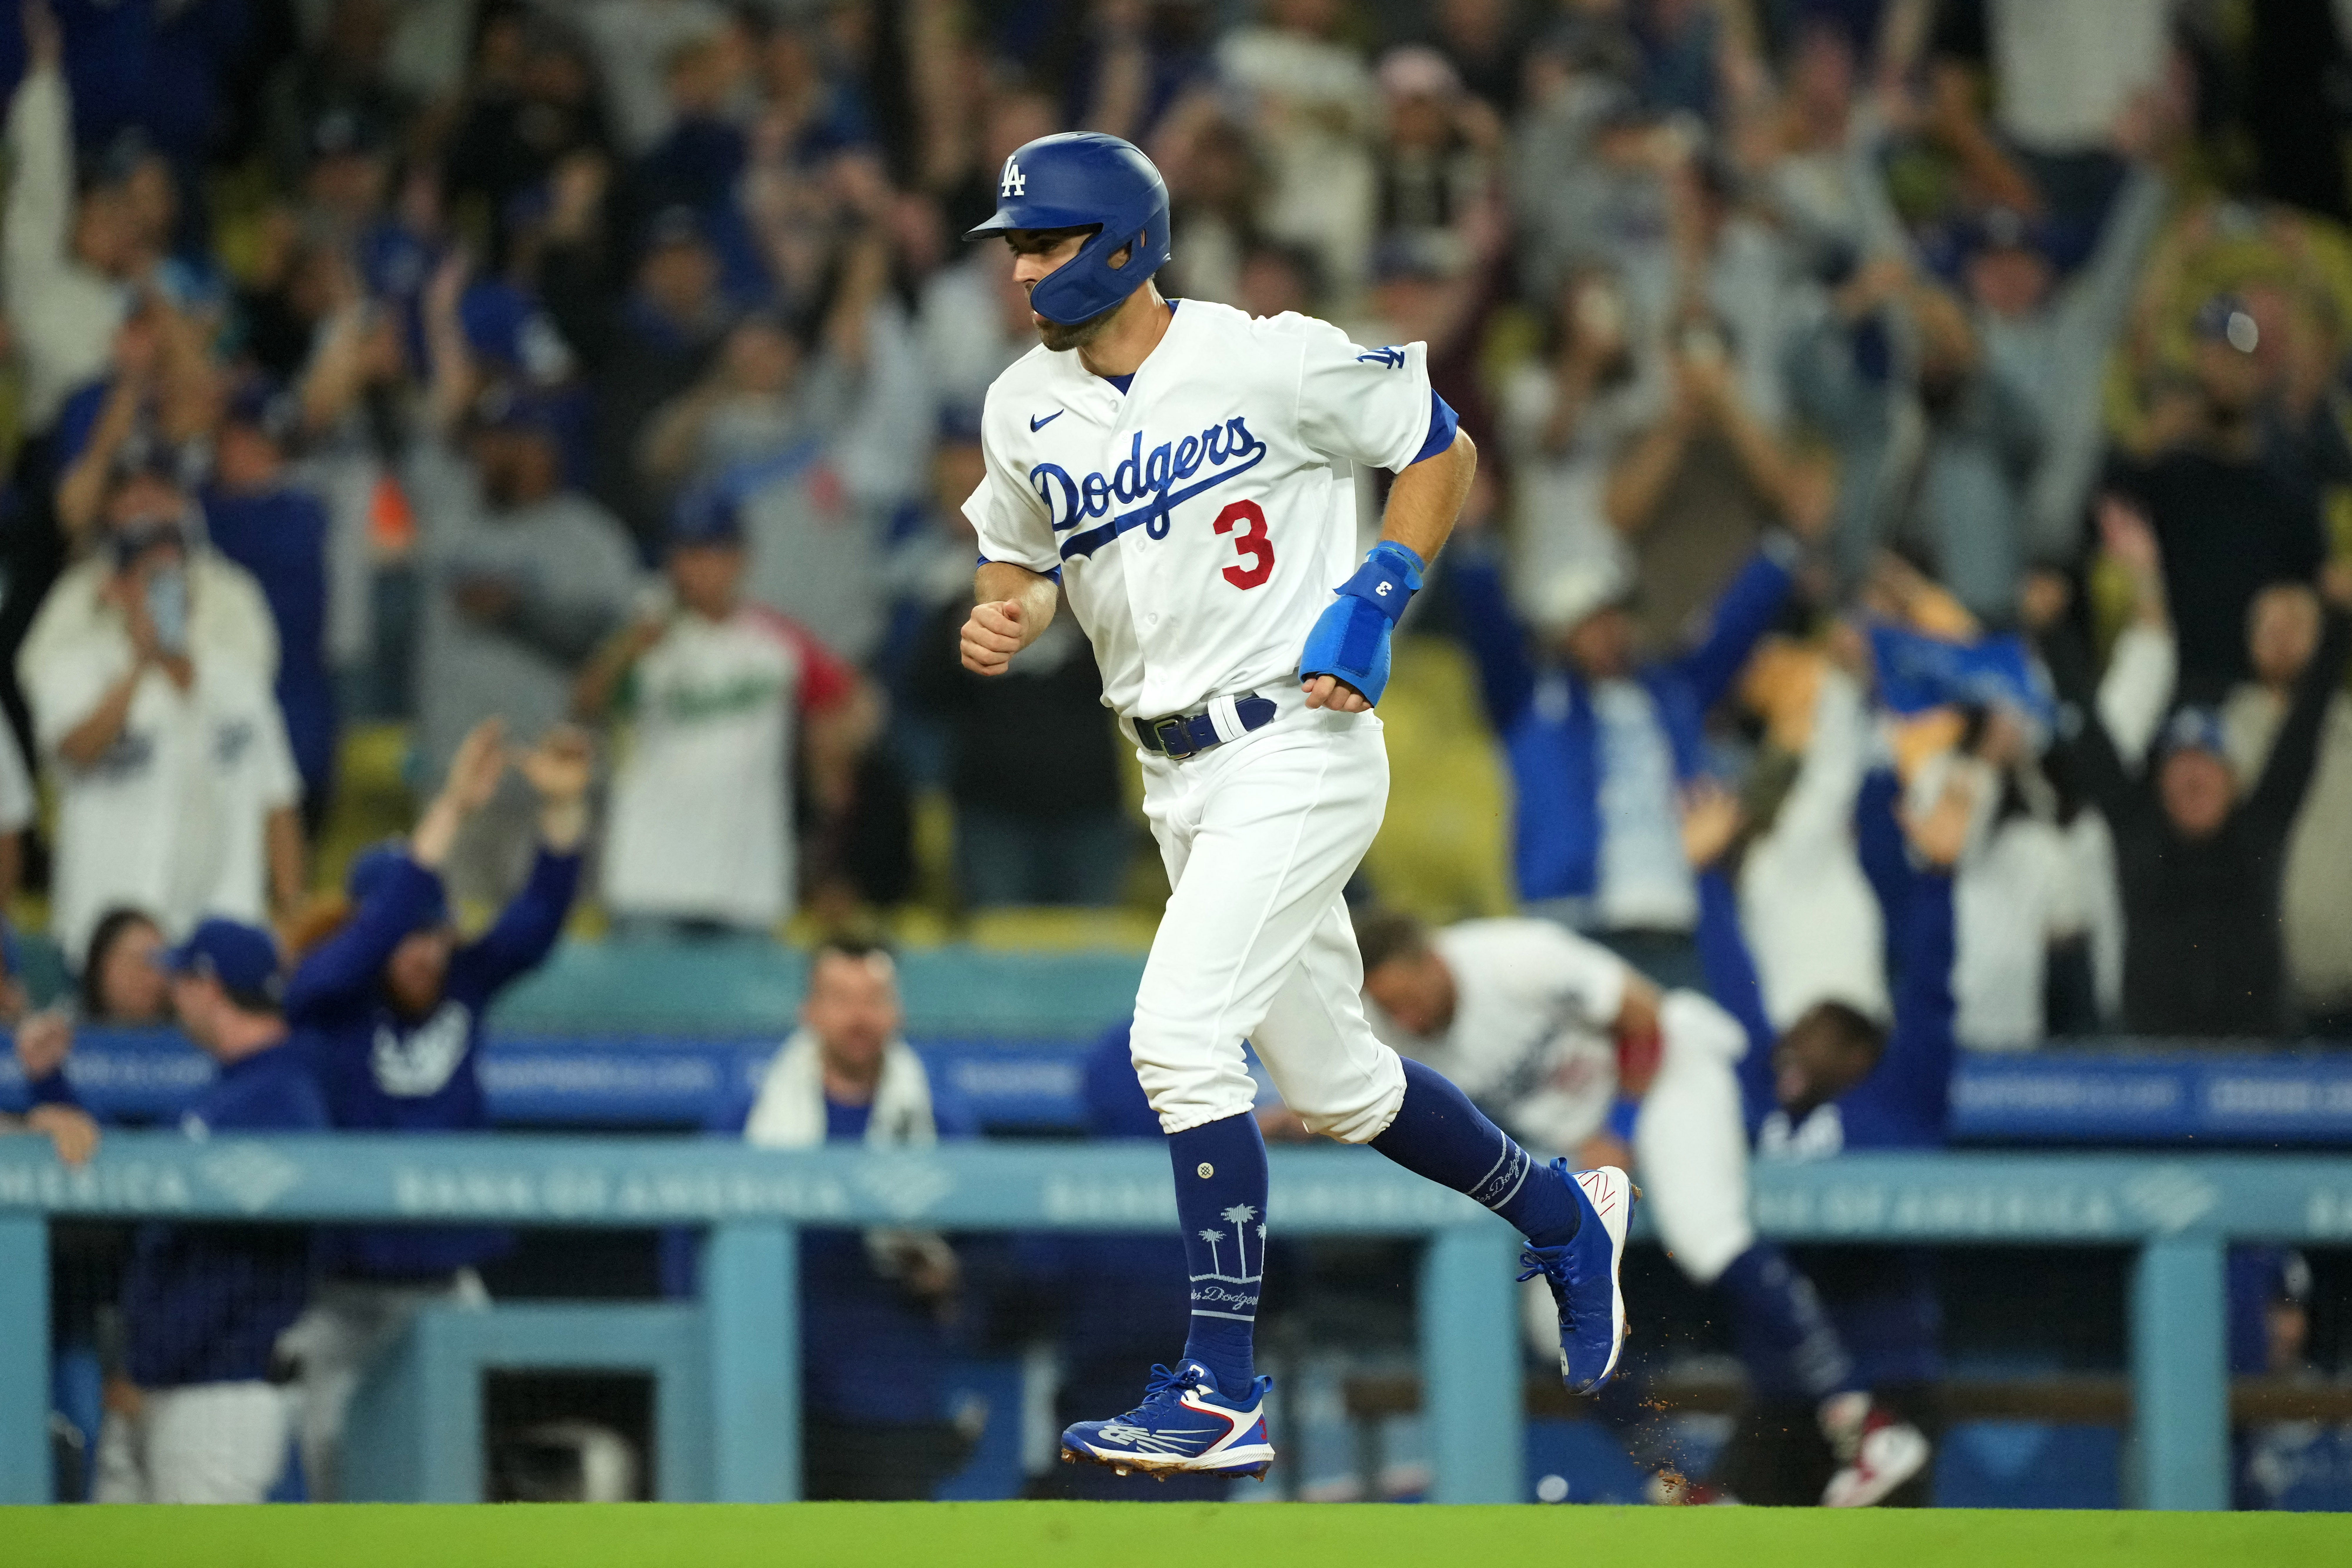 Dodgers win in 12th on bases-loaded walk against Twins